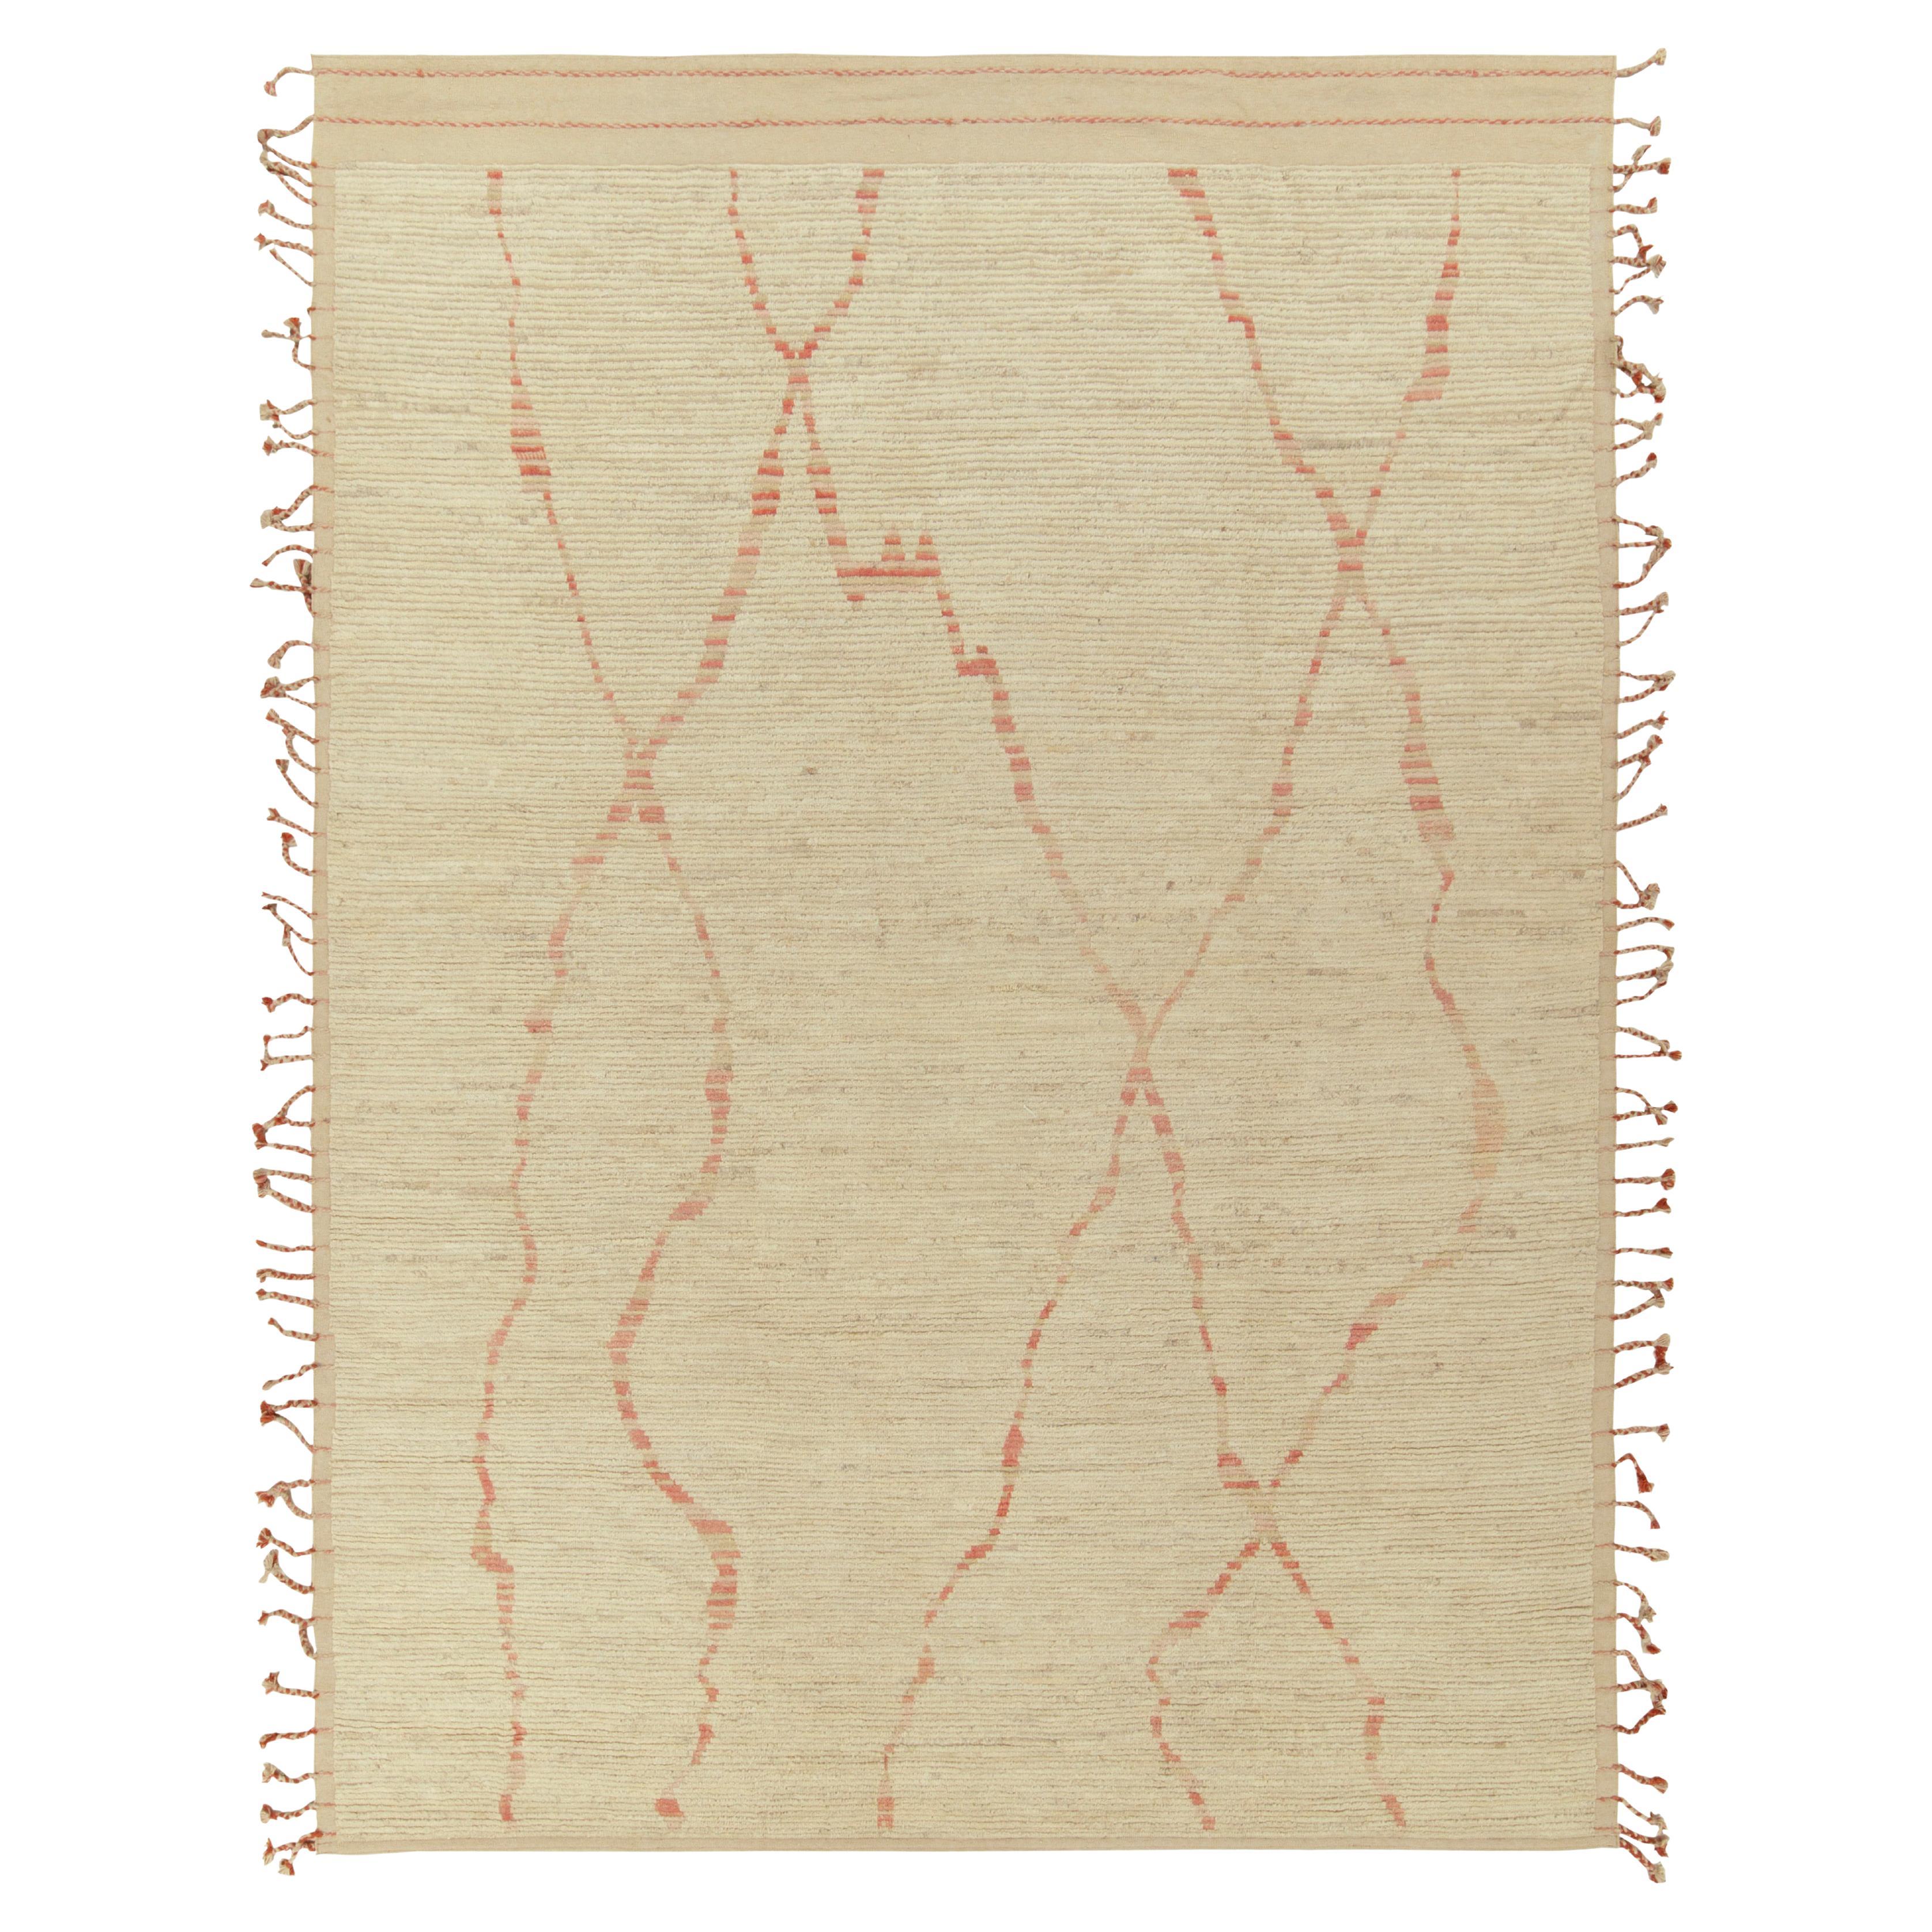 Rug & Kilim's Contemporary Moroccan Style Rug in Beige-White & Red